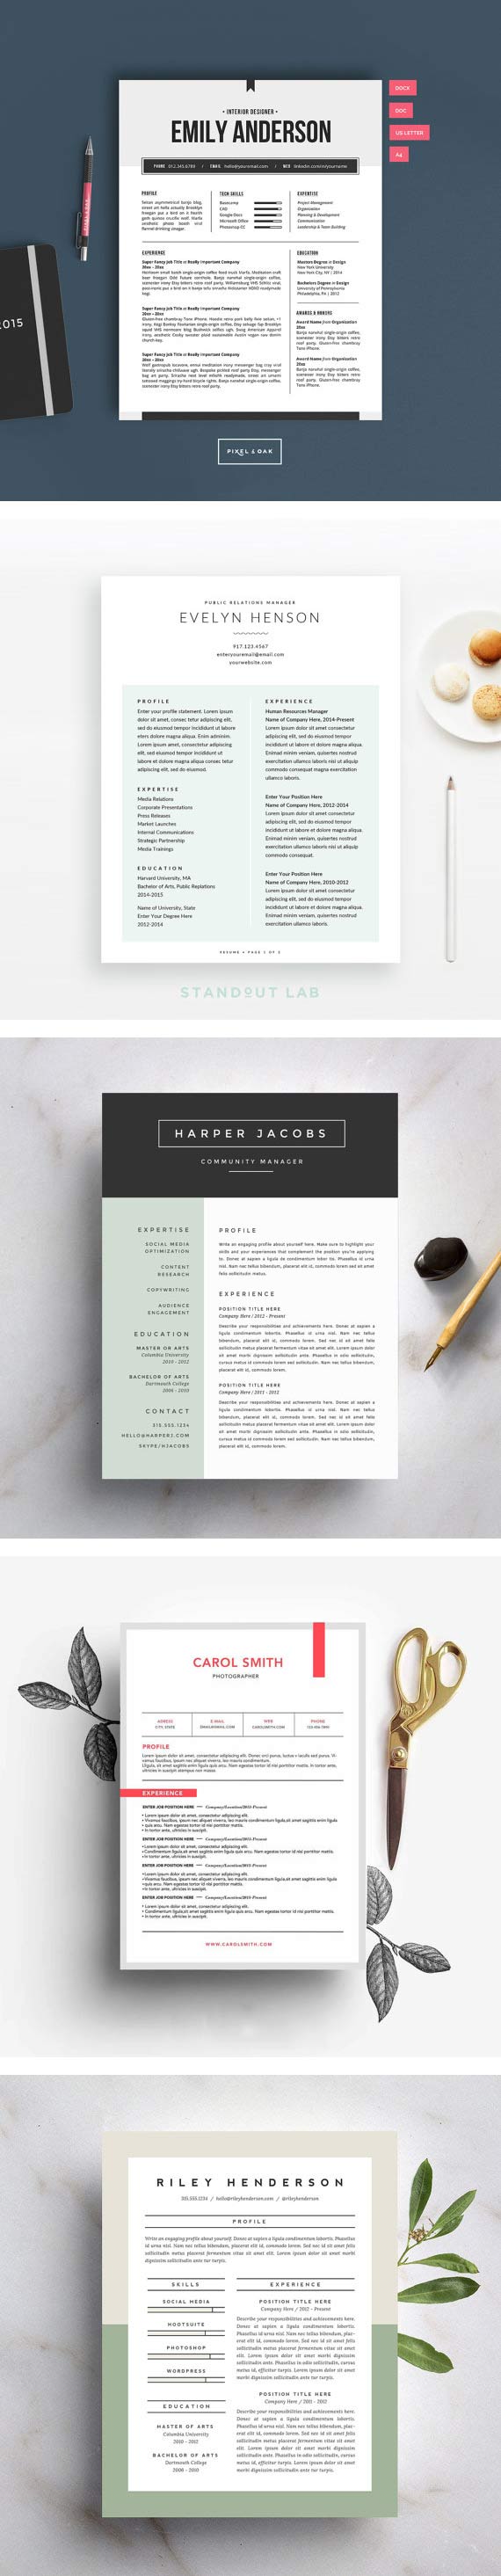 15 Beautiful Resume Templates You Can Buy on Etsy